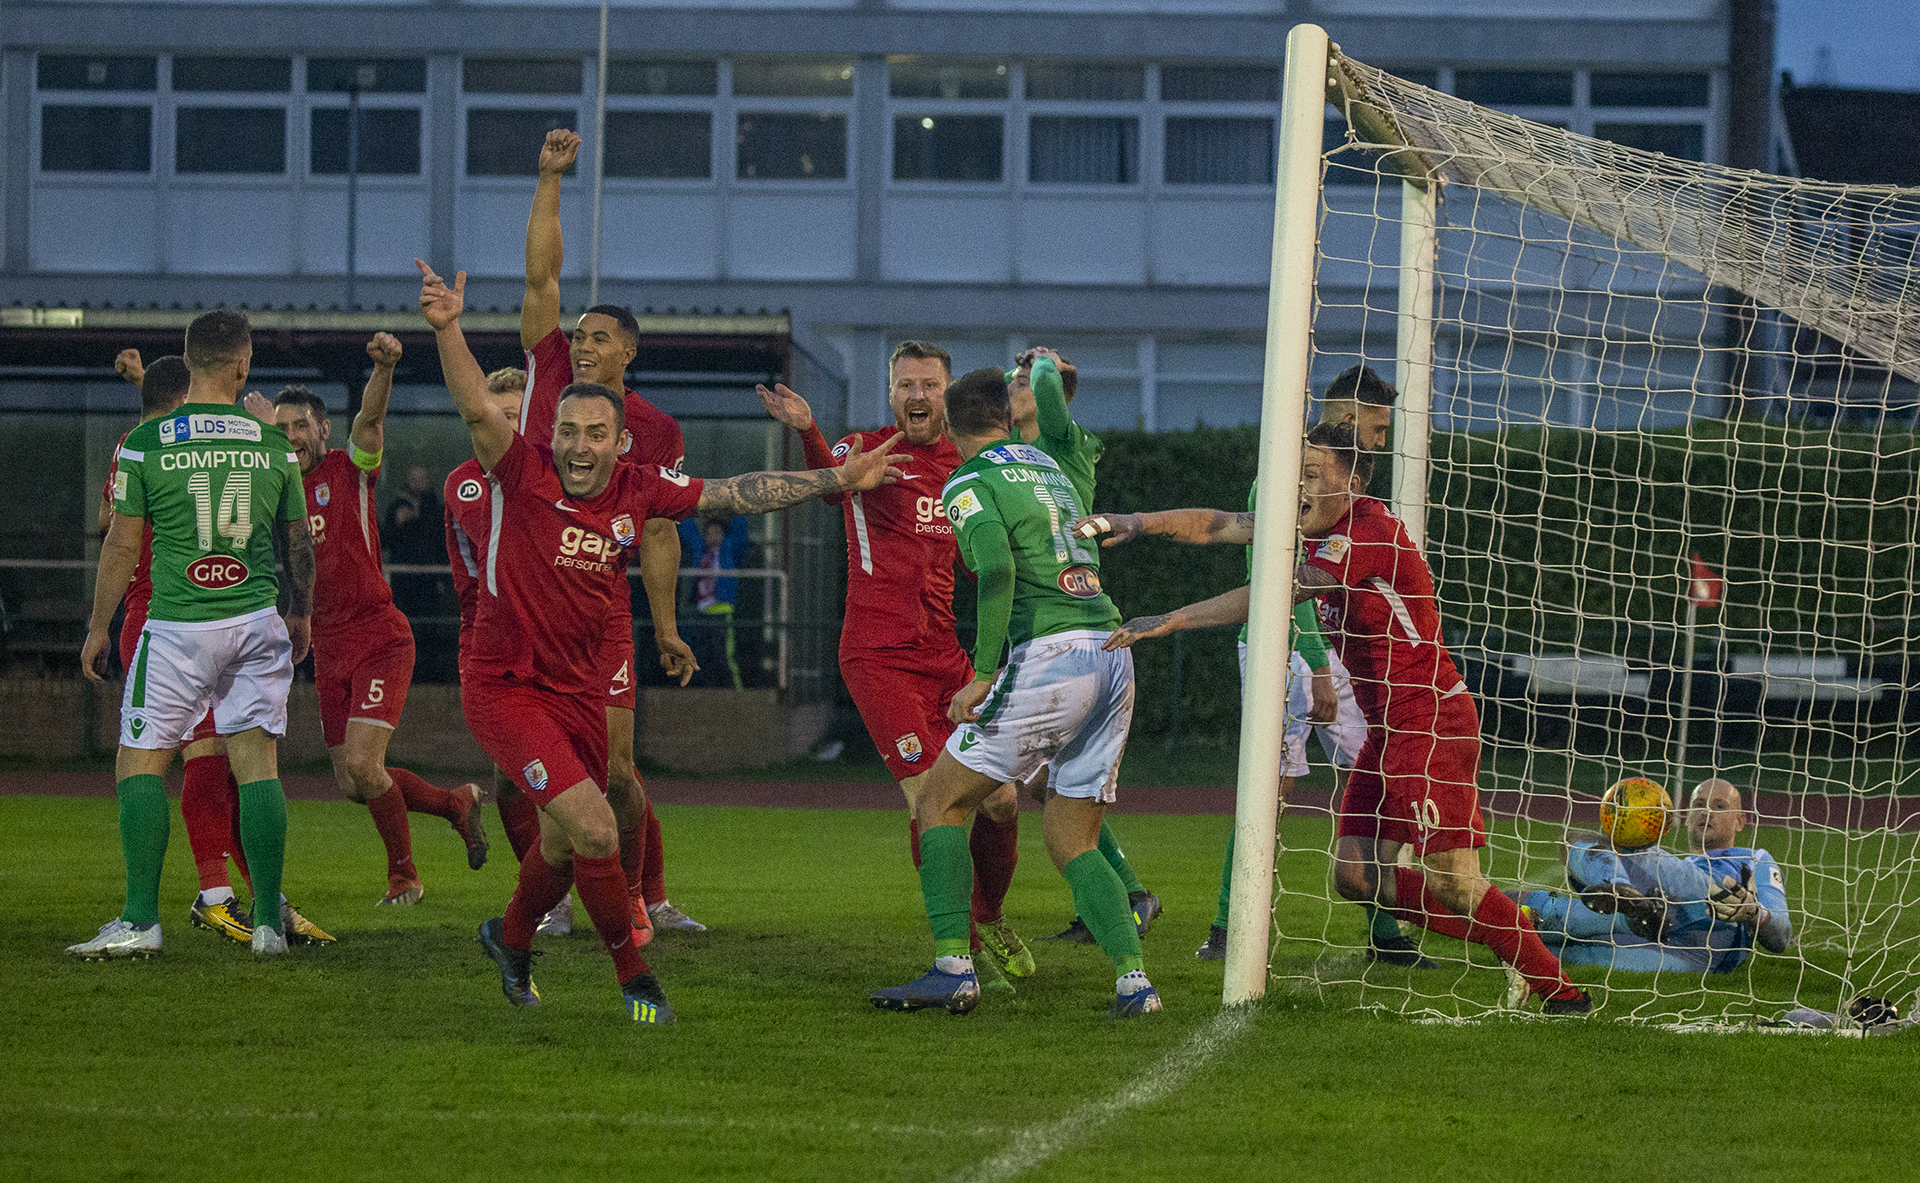 Nomads players celebrate the 91st minute goal which broke the deadlock | © NCM Media